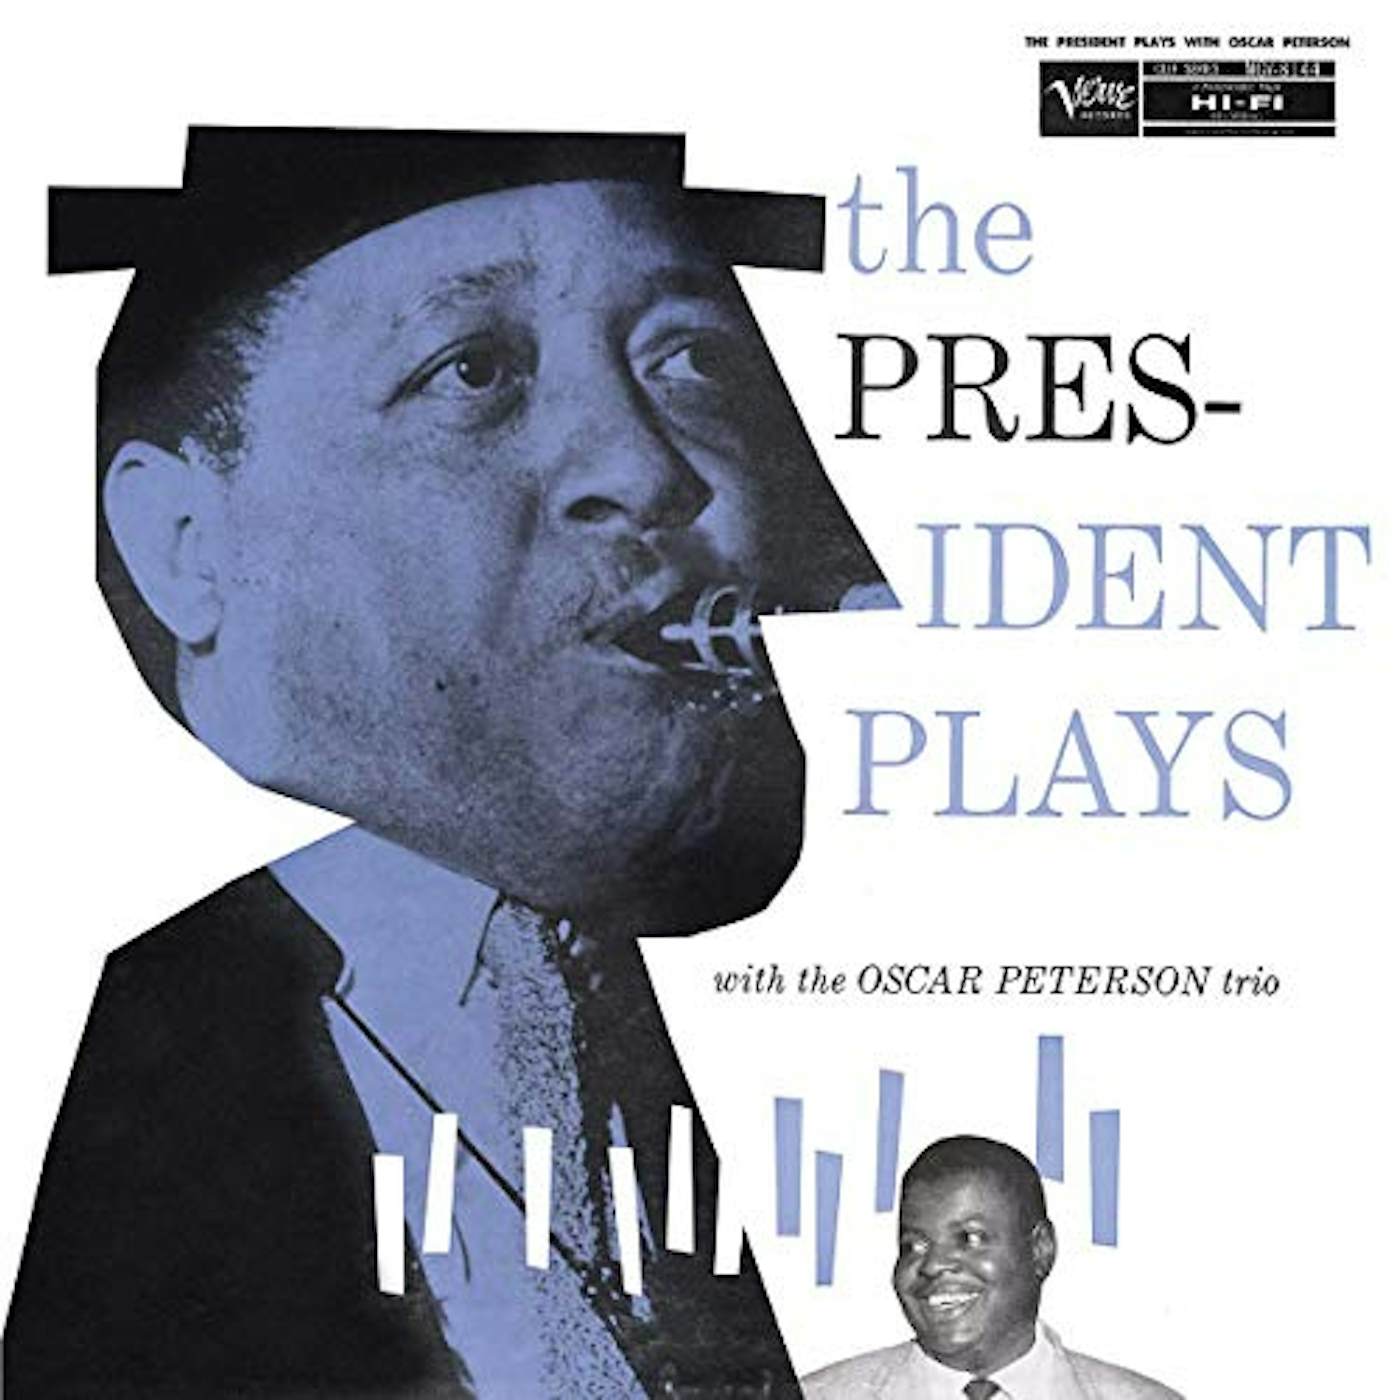 Lester Young PRESIDENT PLAYS WITH THE OSCAR PETERSON TRIO Vinyl Record